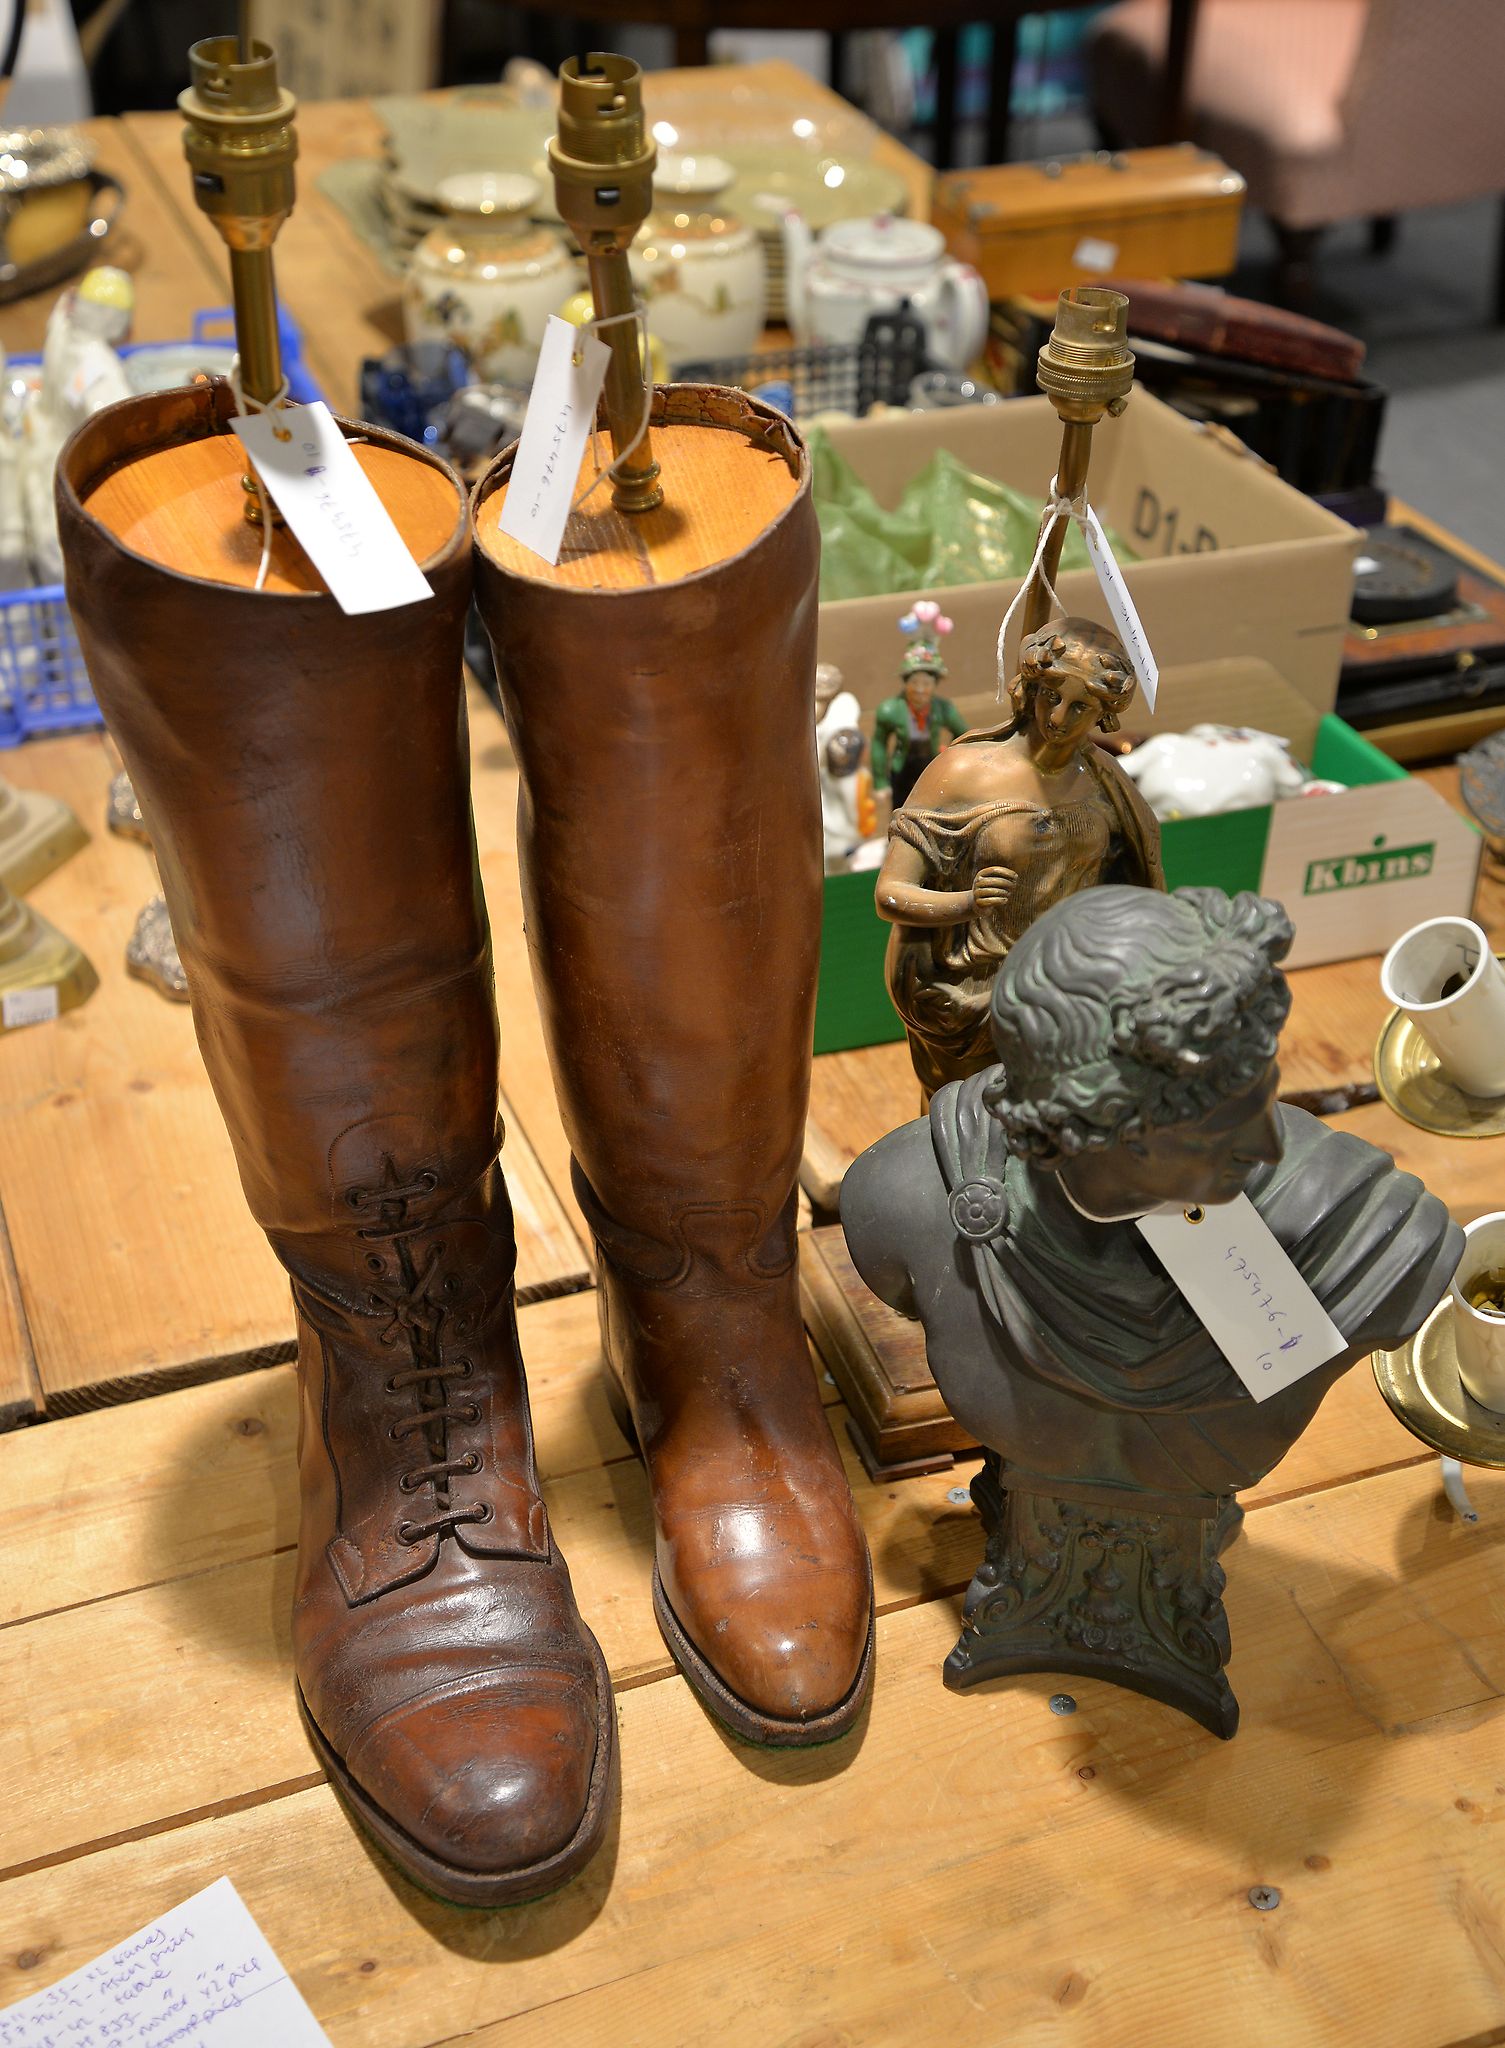 A figural lamp, resin bust, pair of boots